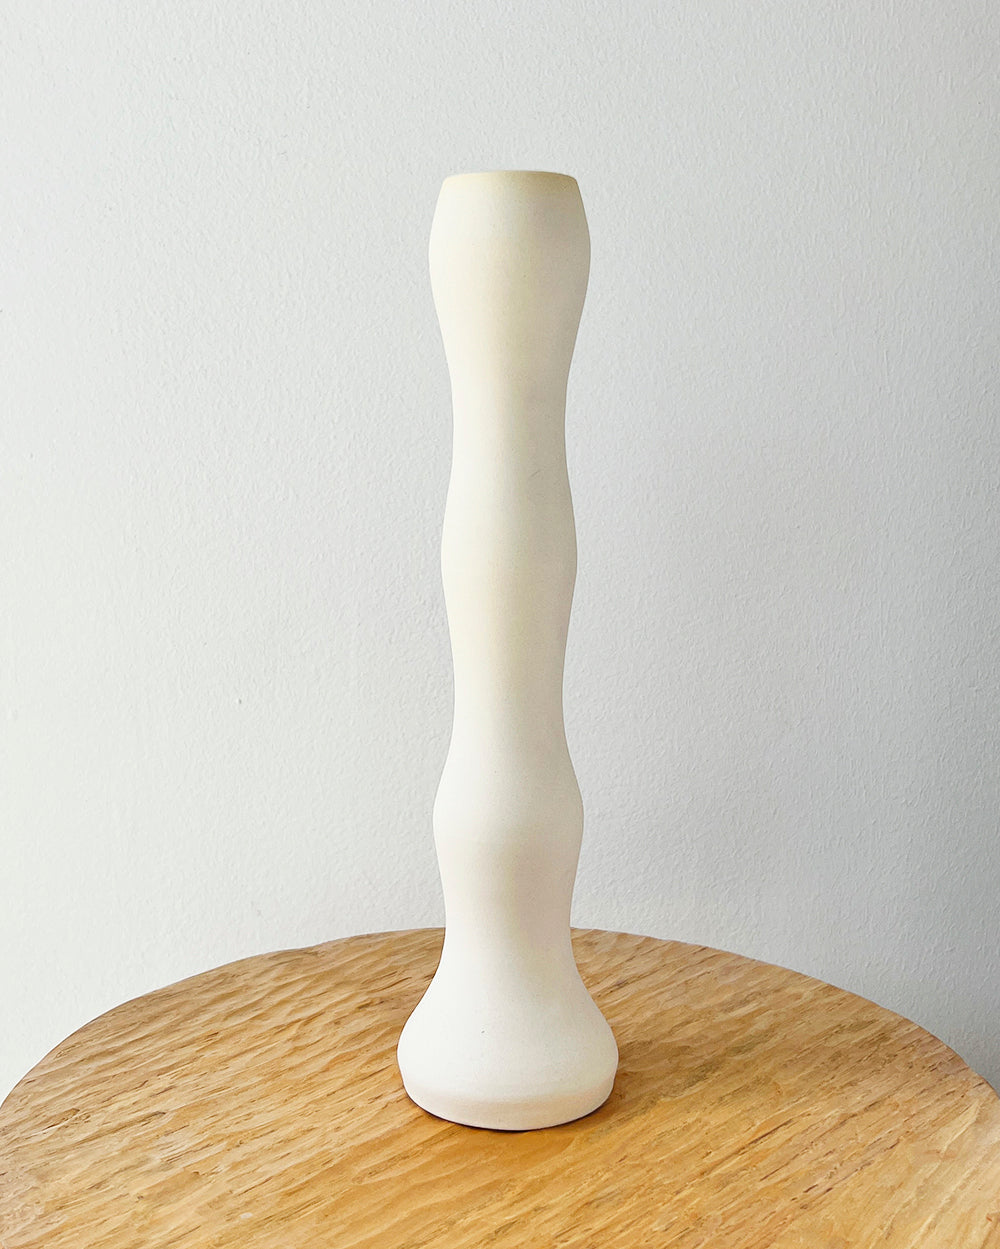 One-of-a-Kind Ceramic Candle Holders - Ivory